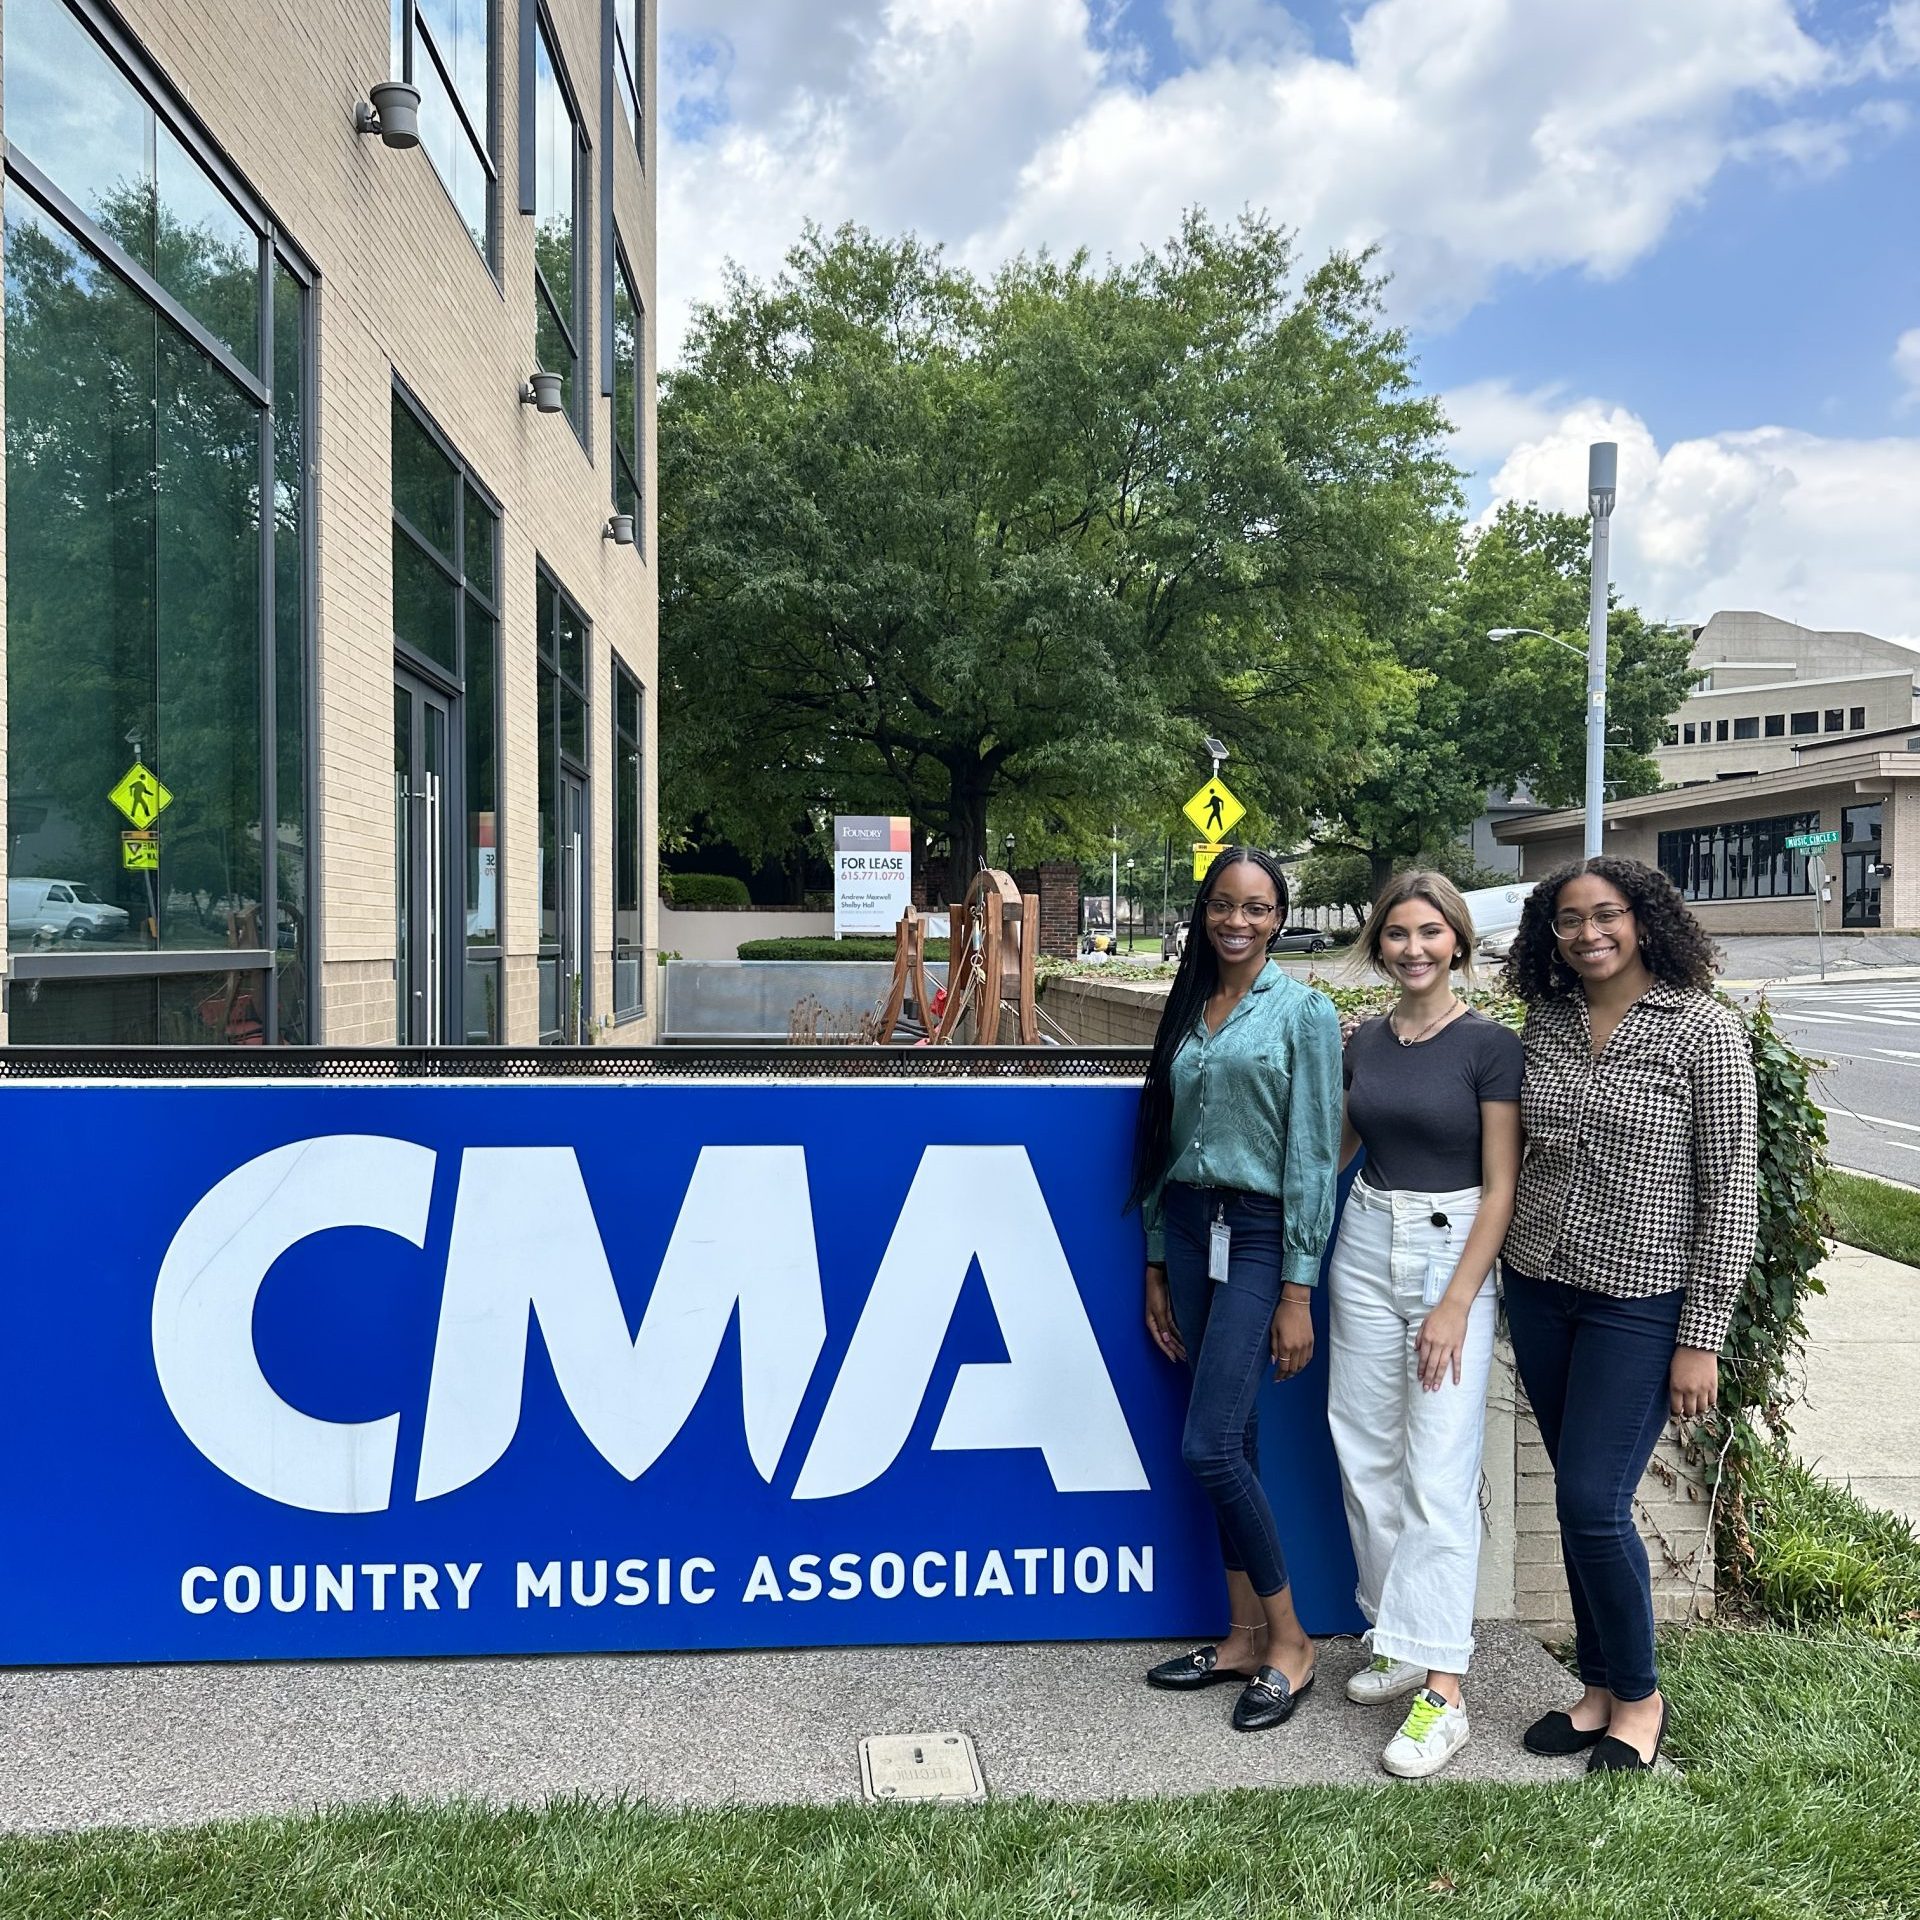 C&IS at the Country Music Association